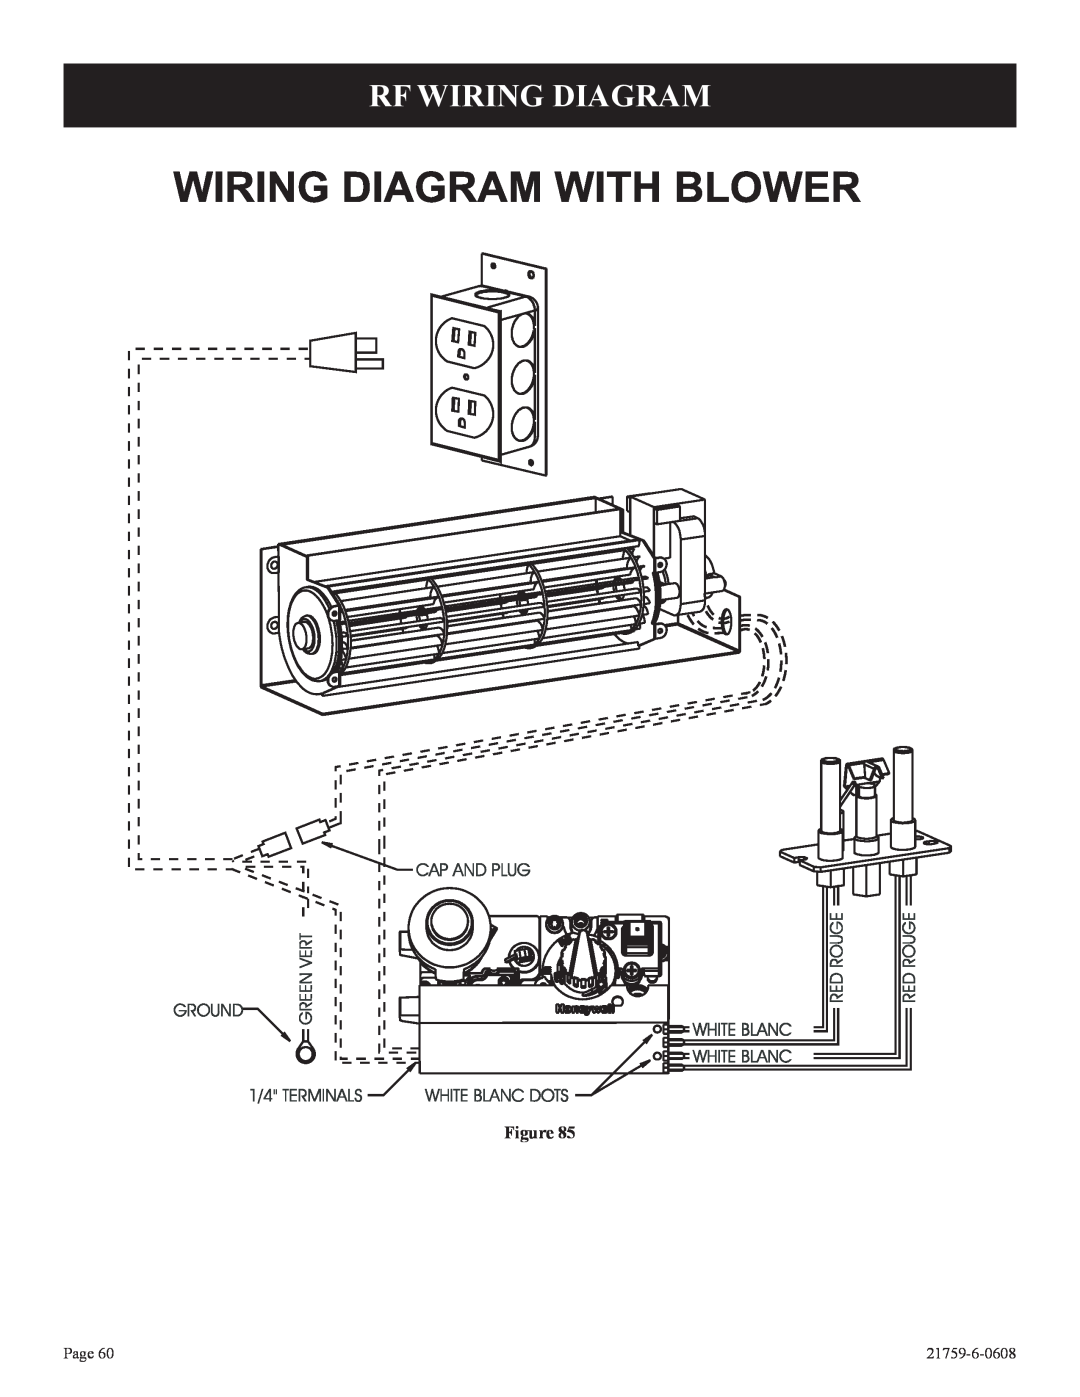 Empire Comfort Systems P)-2, DVP42FP Rf Wiring Diagram, Wiring Diagram With Blower, Figure, Page, 21759-6-0608 